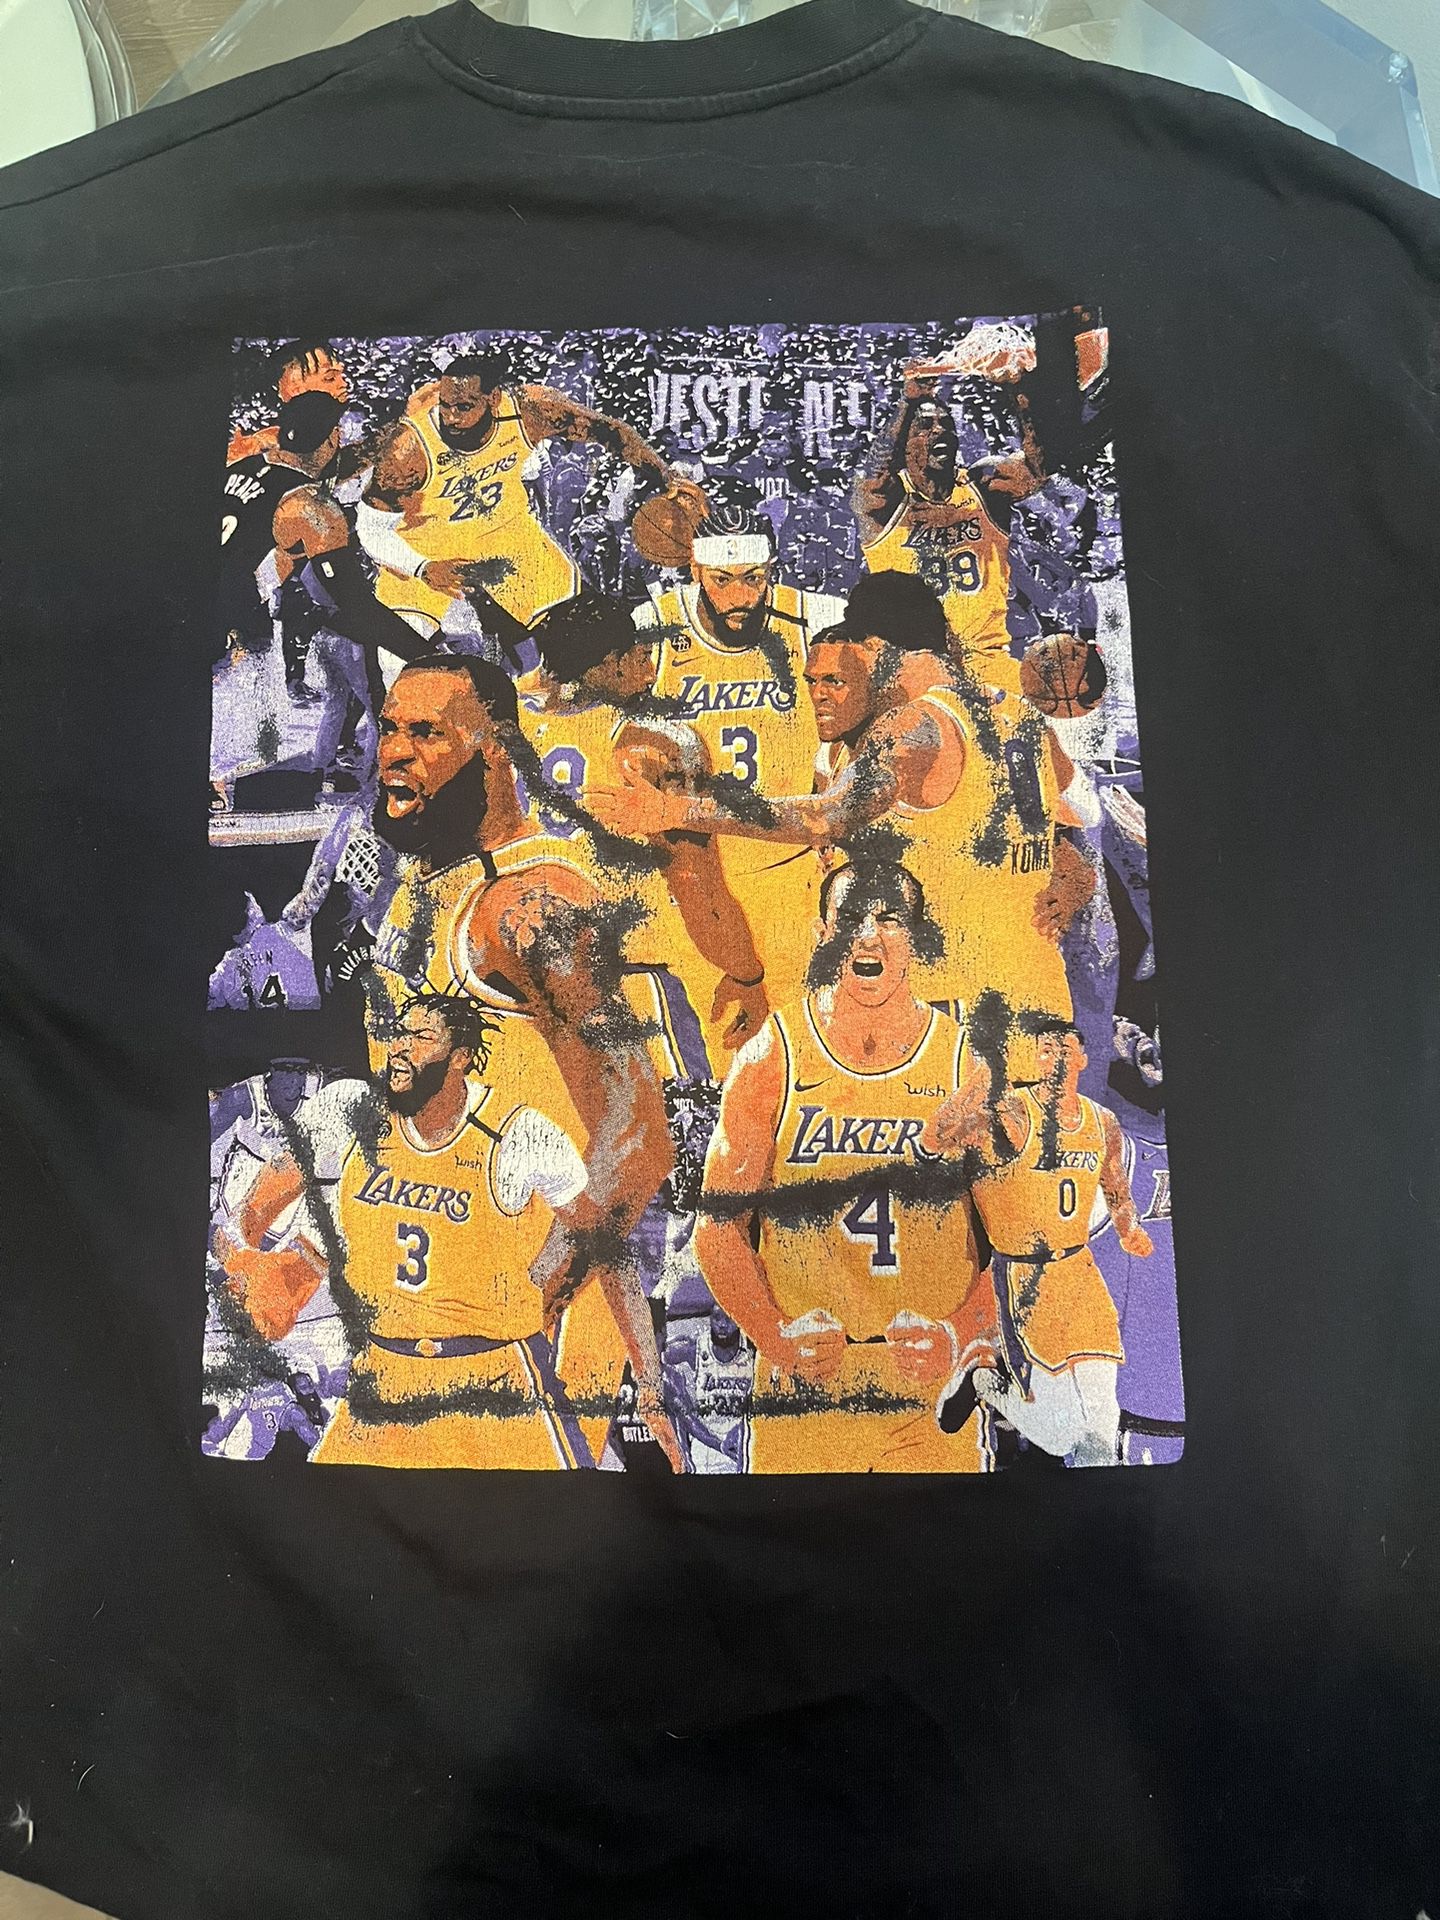 Vintage Lakers 2020 Championship Shirt for Sale in Fullerton, CA - OfferUp